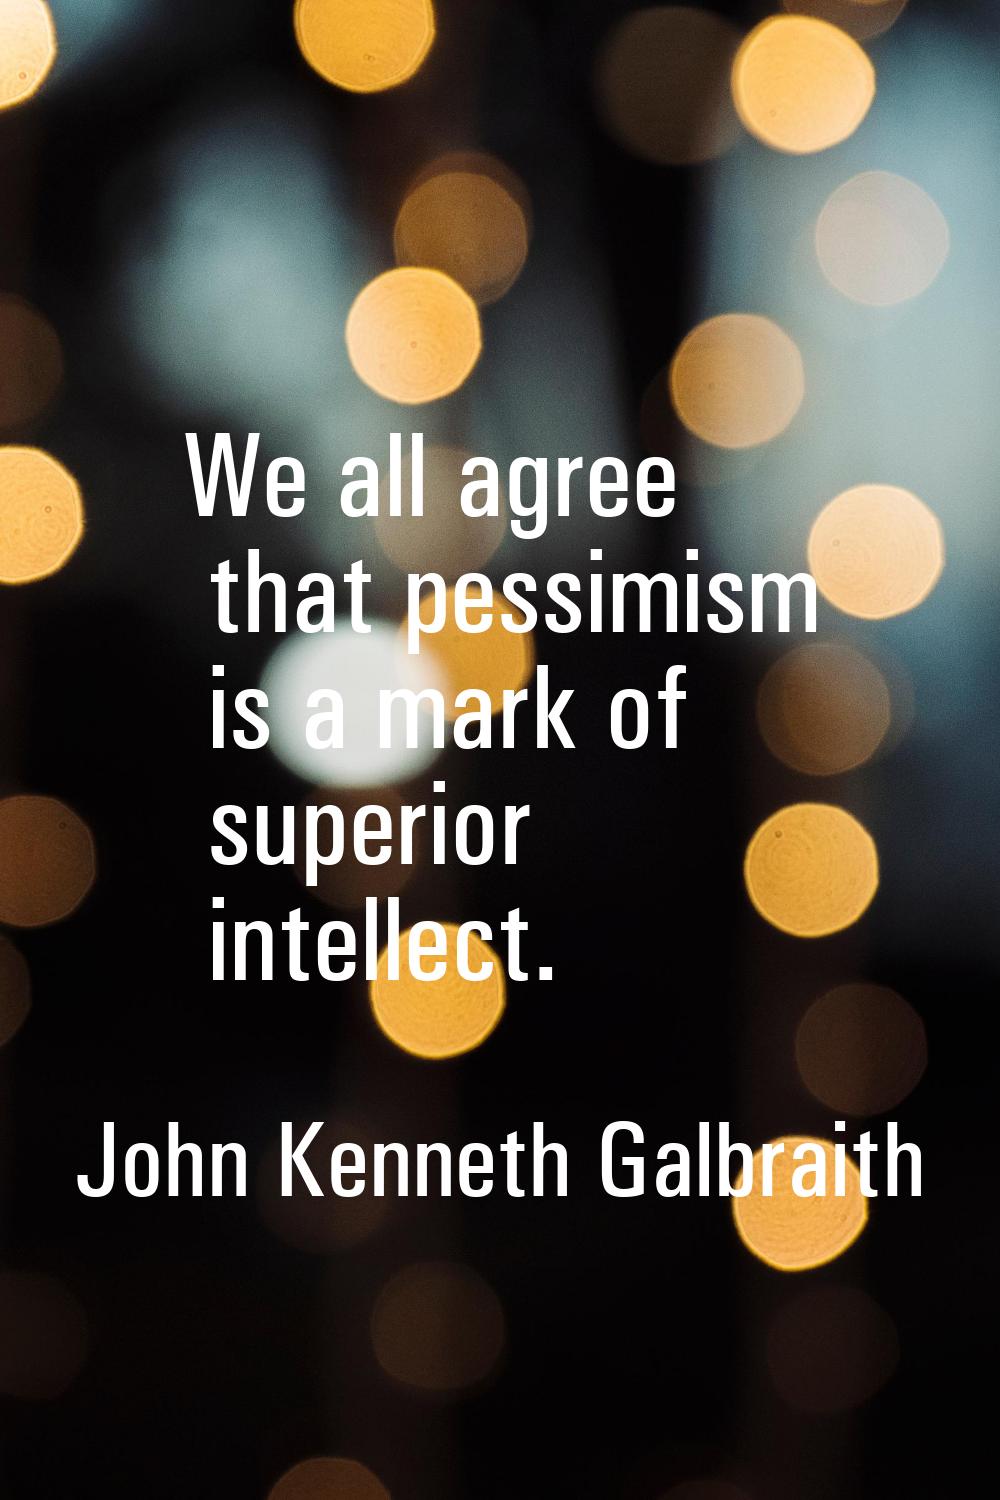 We all agree that pessimism is a mark of superior intellect.